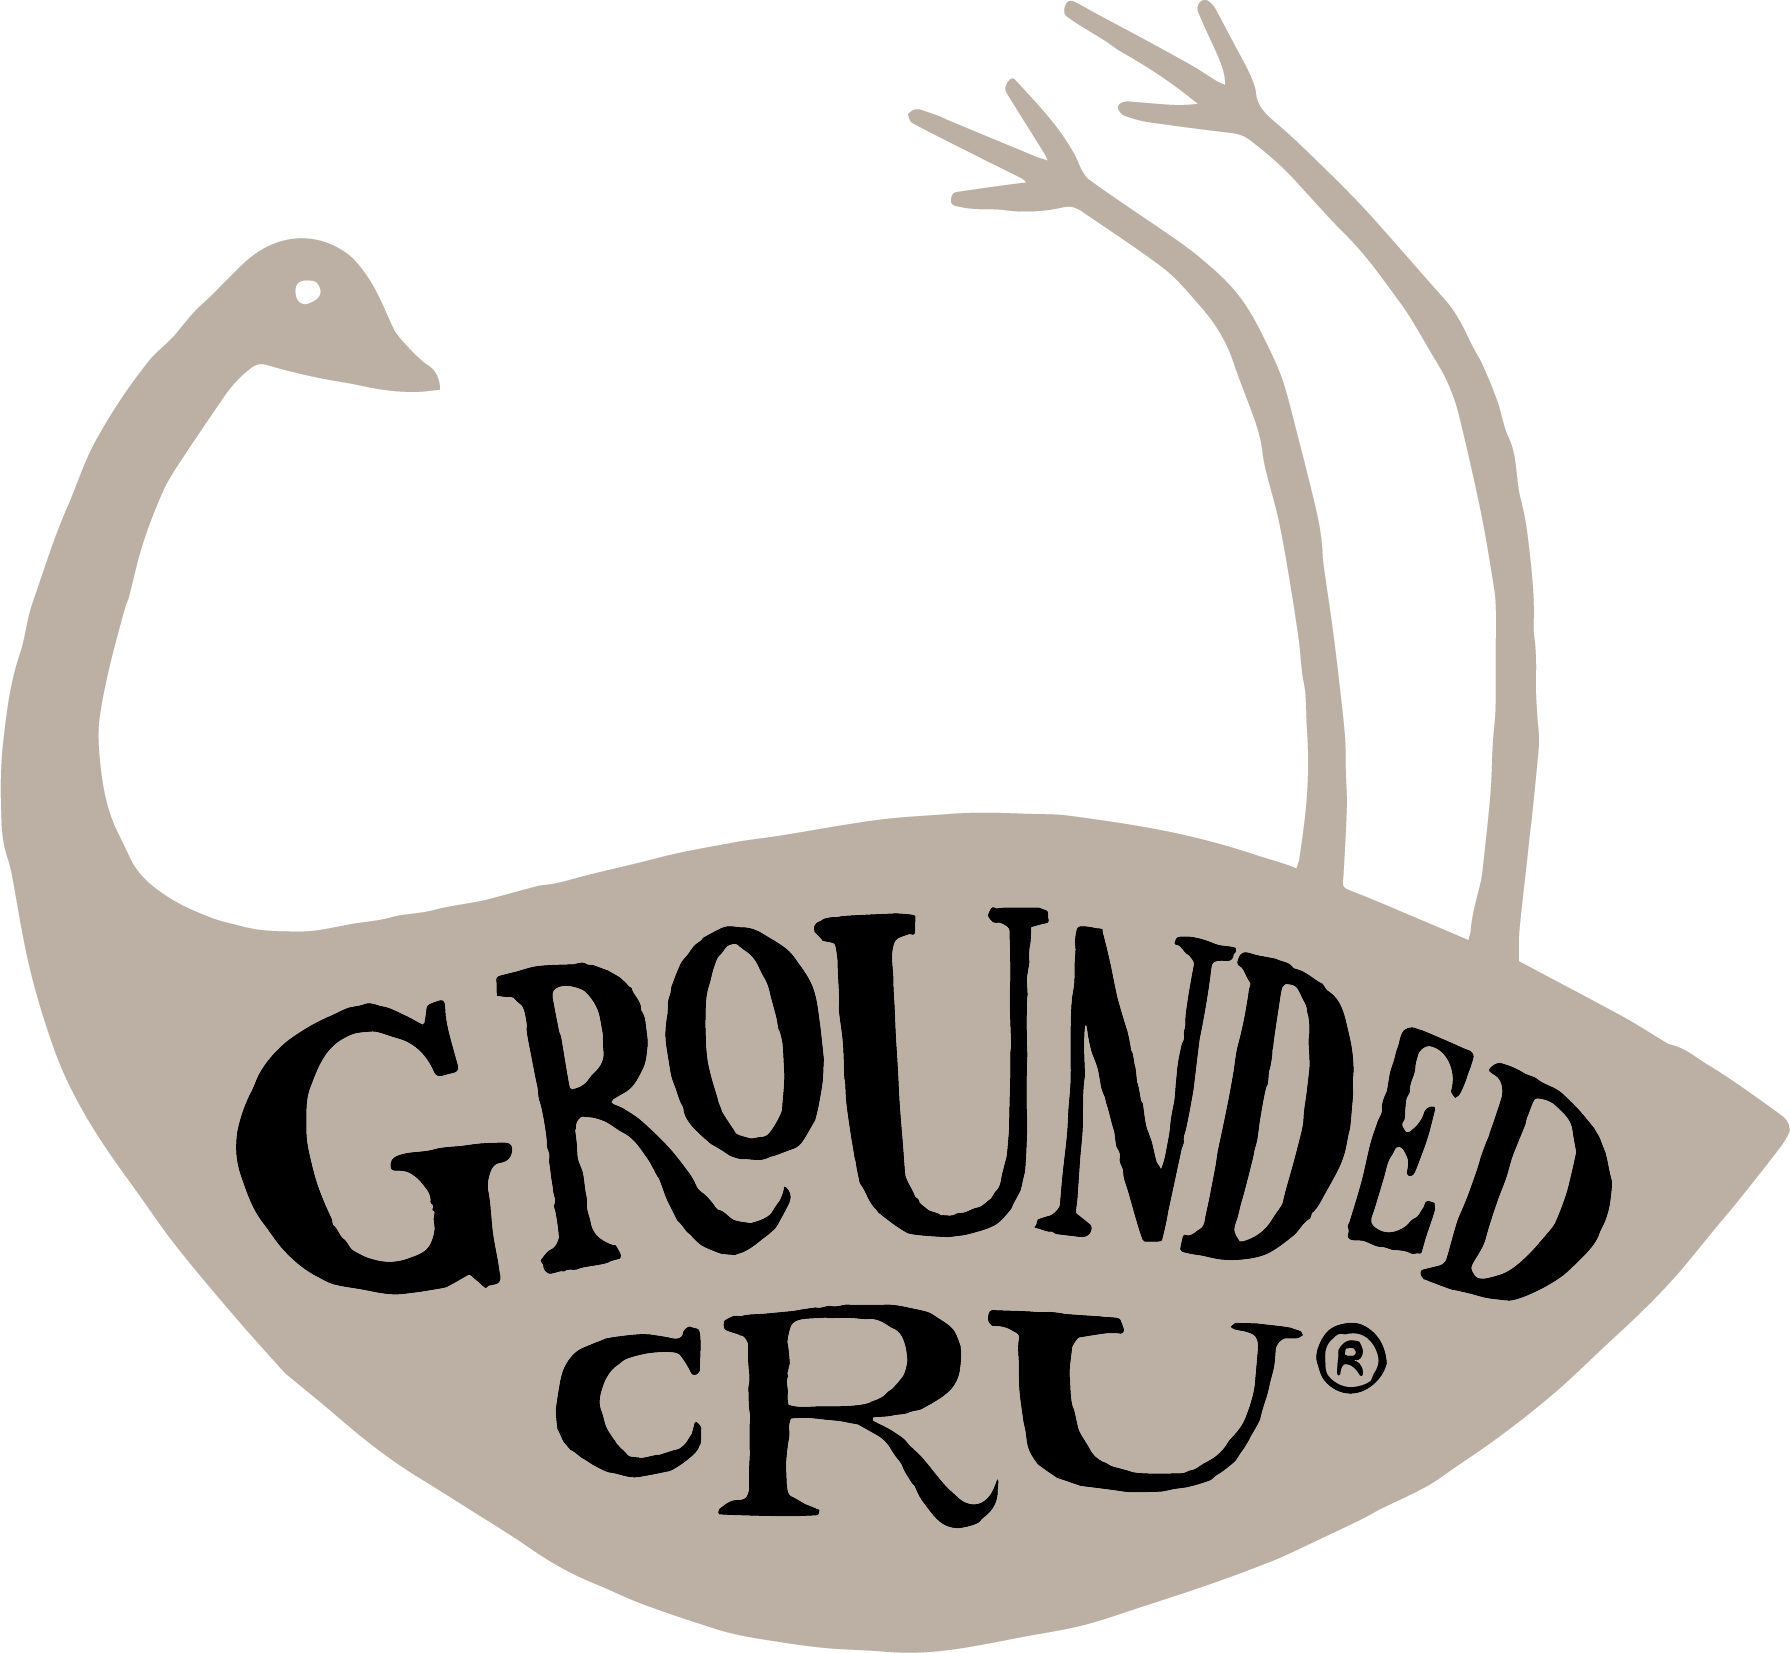 Grounded Cru